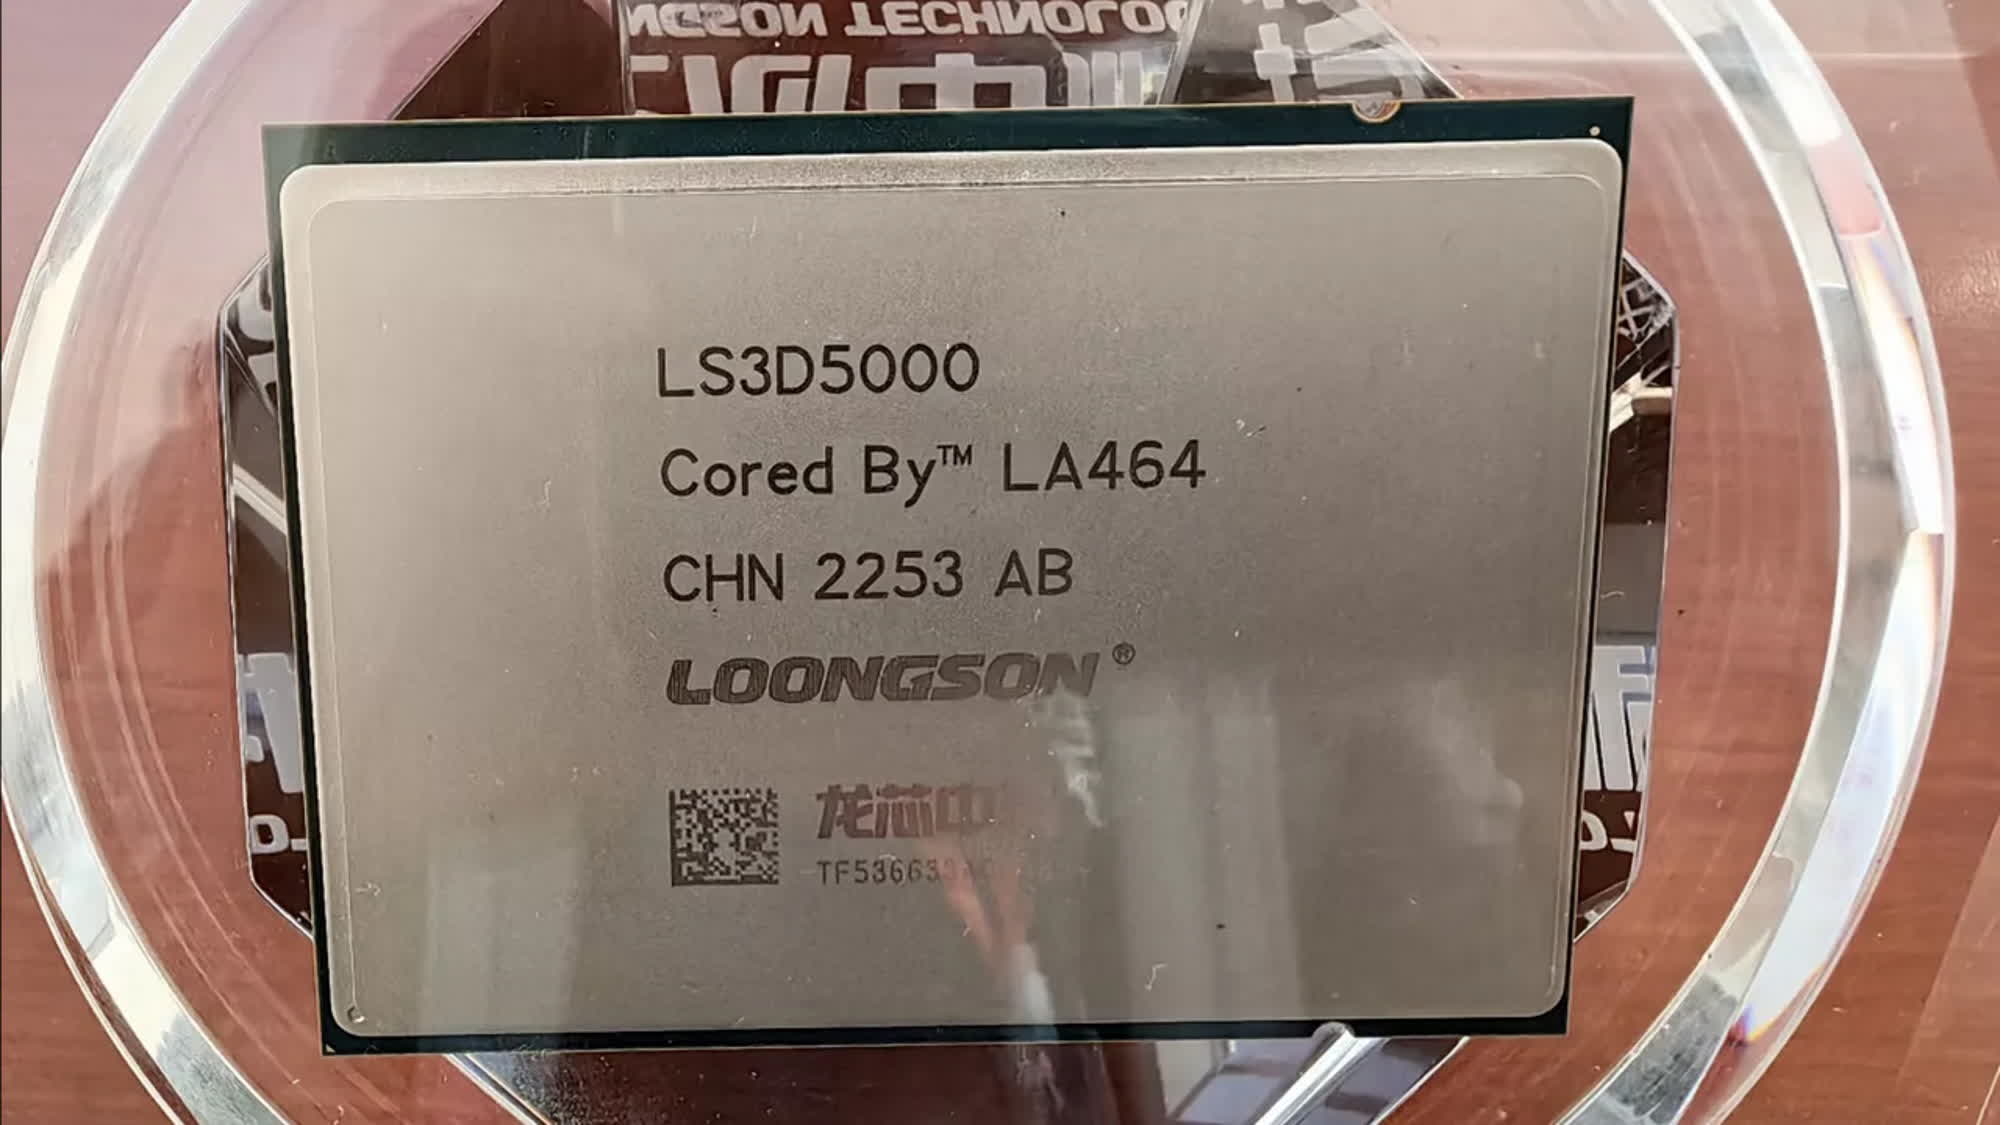 China's Loongson reveals new 3A6000 CPU, claims performance on par with 3-year-old Intel chips